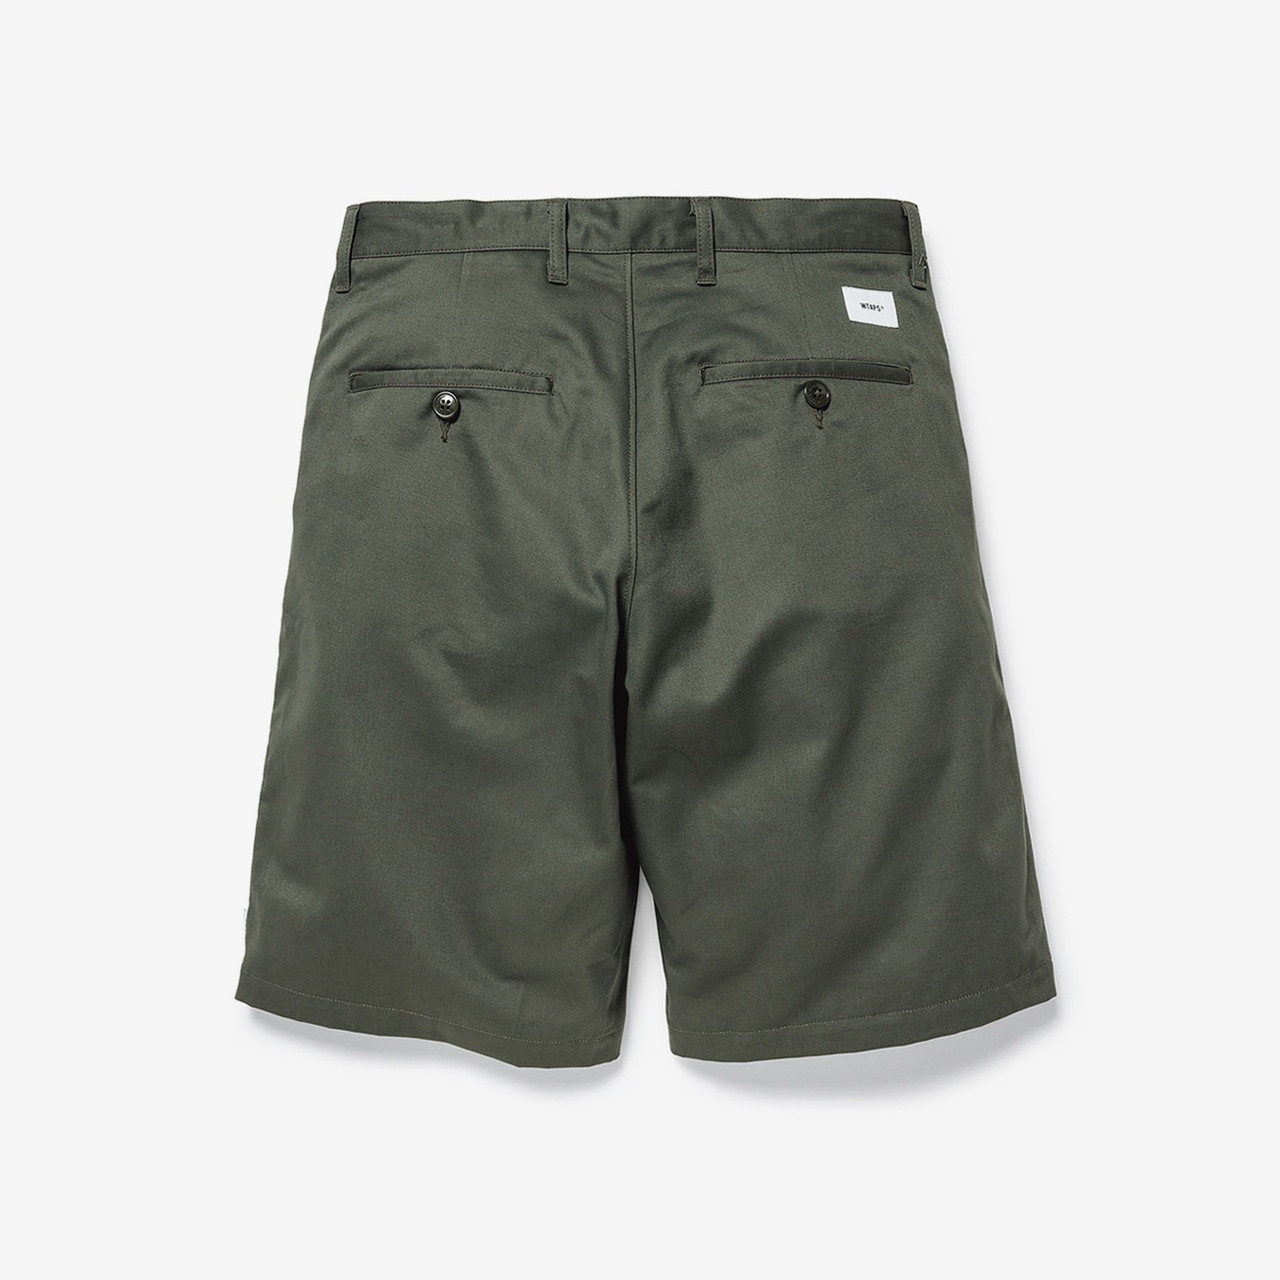 WTAPS Trousers TUCK 02 / SHORTS / COTTON. TWILL